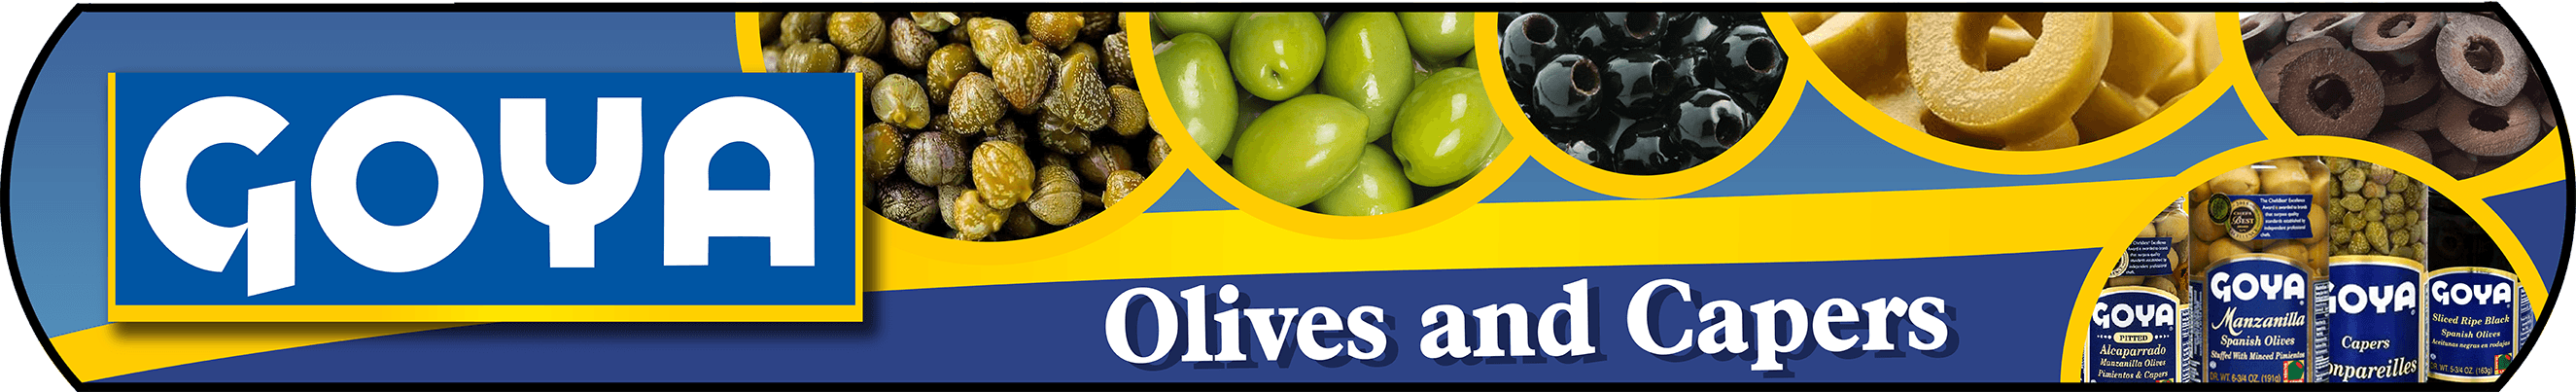 Goya Olives and Capers Banner